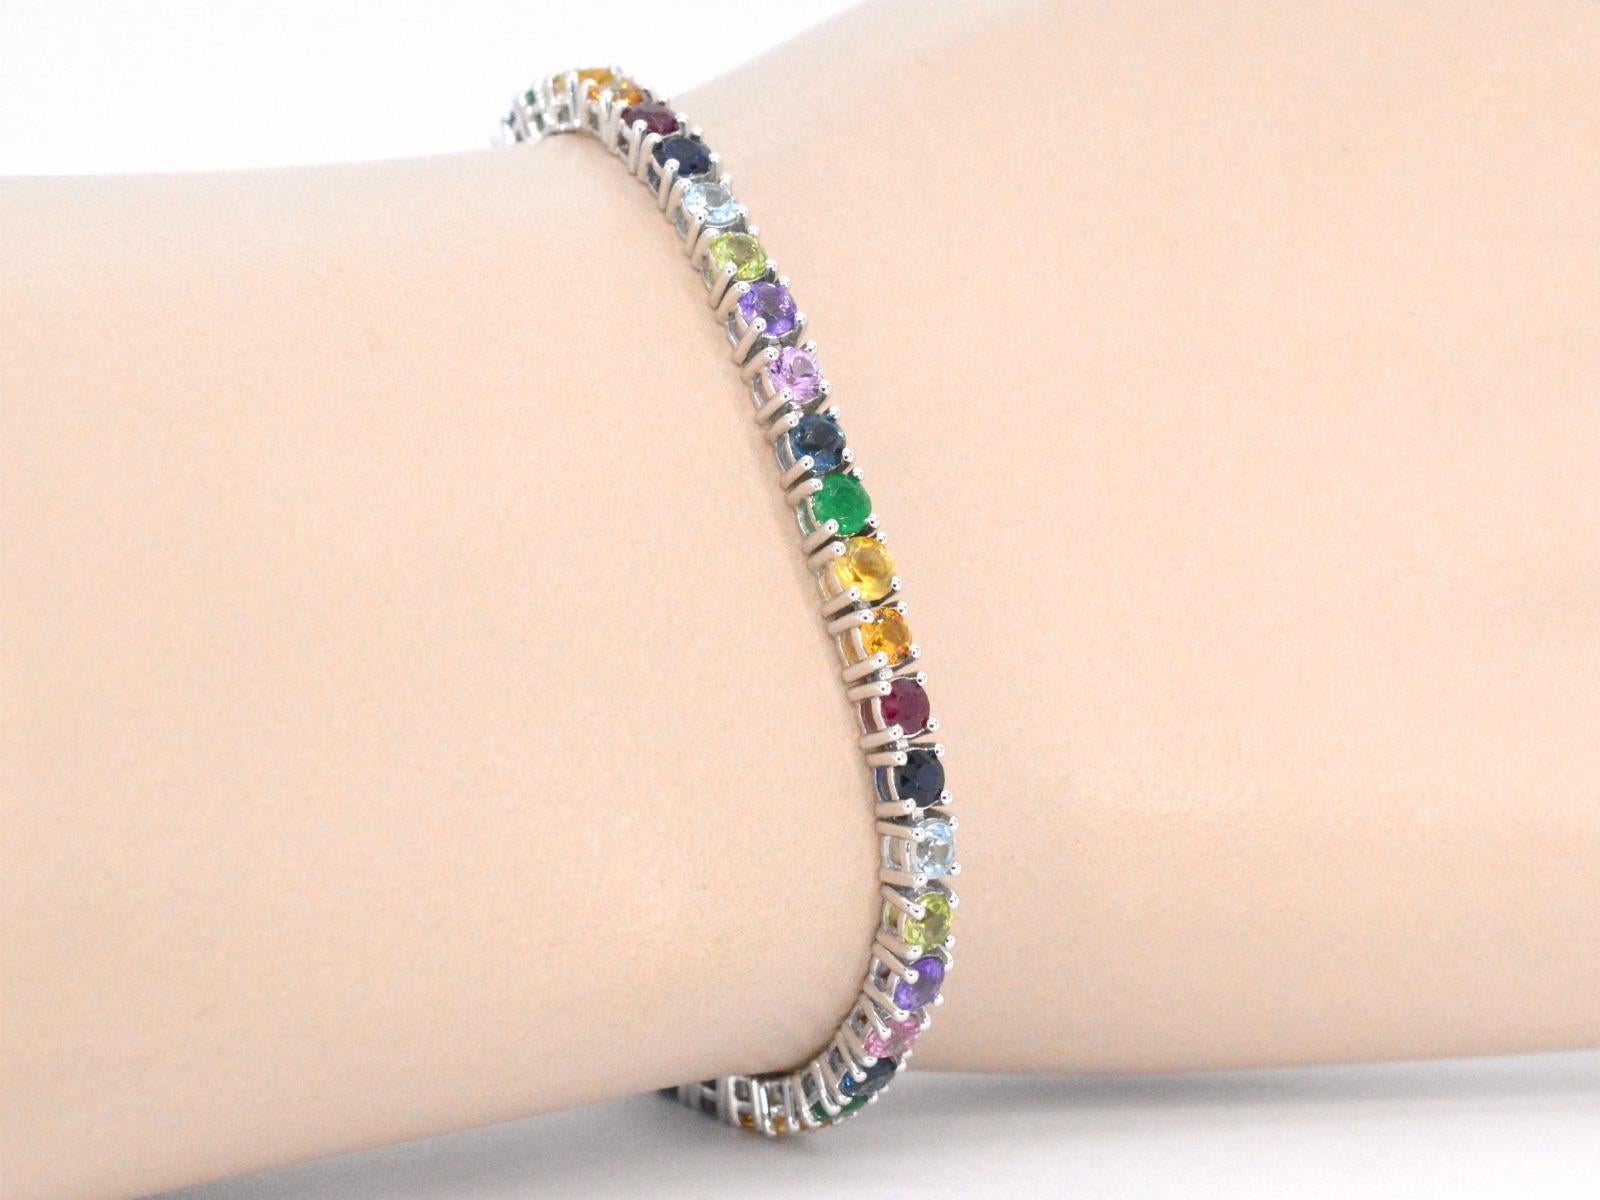 Gemstones: rainbow
Weight: 7.50 carats
Colour: multicolour
Clarity: With natural inclusions
Cut: Brilliant cut
Quality: Very good

Jewel: Bracelet
Weight: 10 gram
Hallmark: 14 karat 
Length: 18 cm
Condition: New

Retail value: € 3.750,-

The white